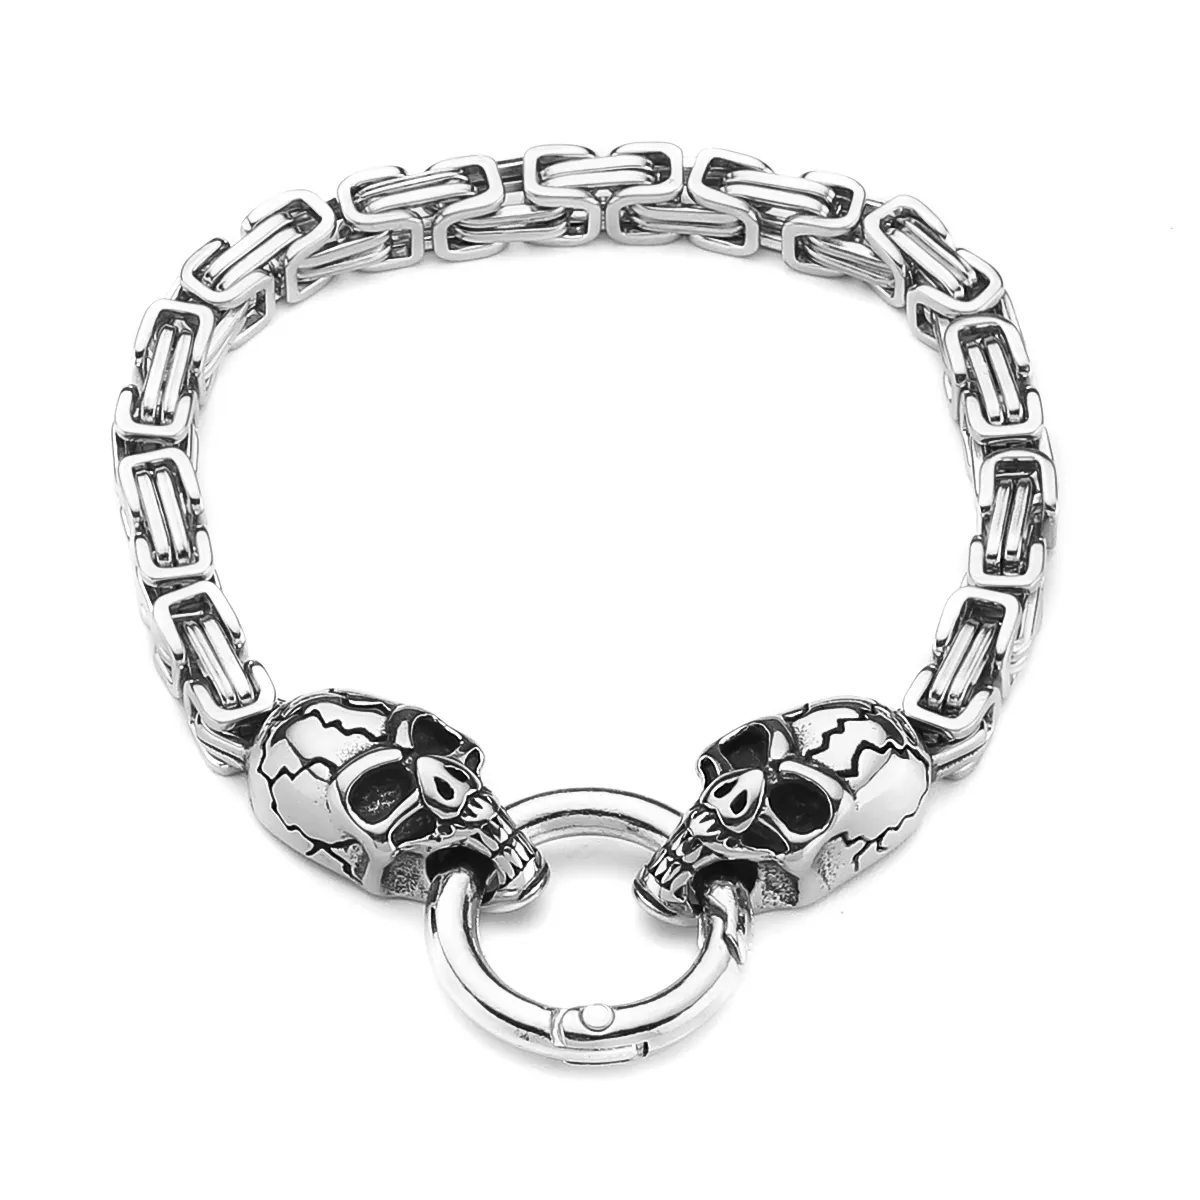 Stainless Steel Gothic Metal Wind Skull Men's Bracelet Viking Punk Party Jewelry Gift Wholesale